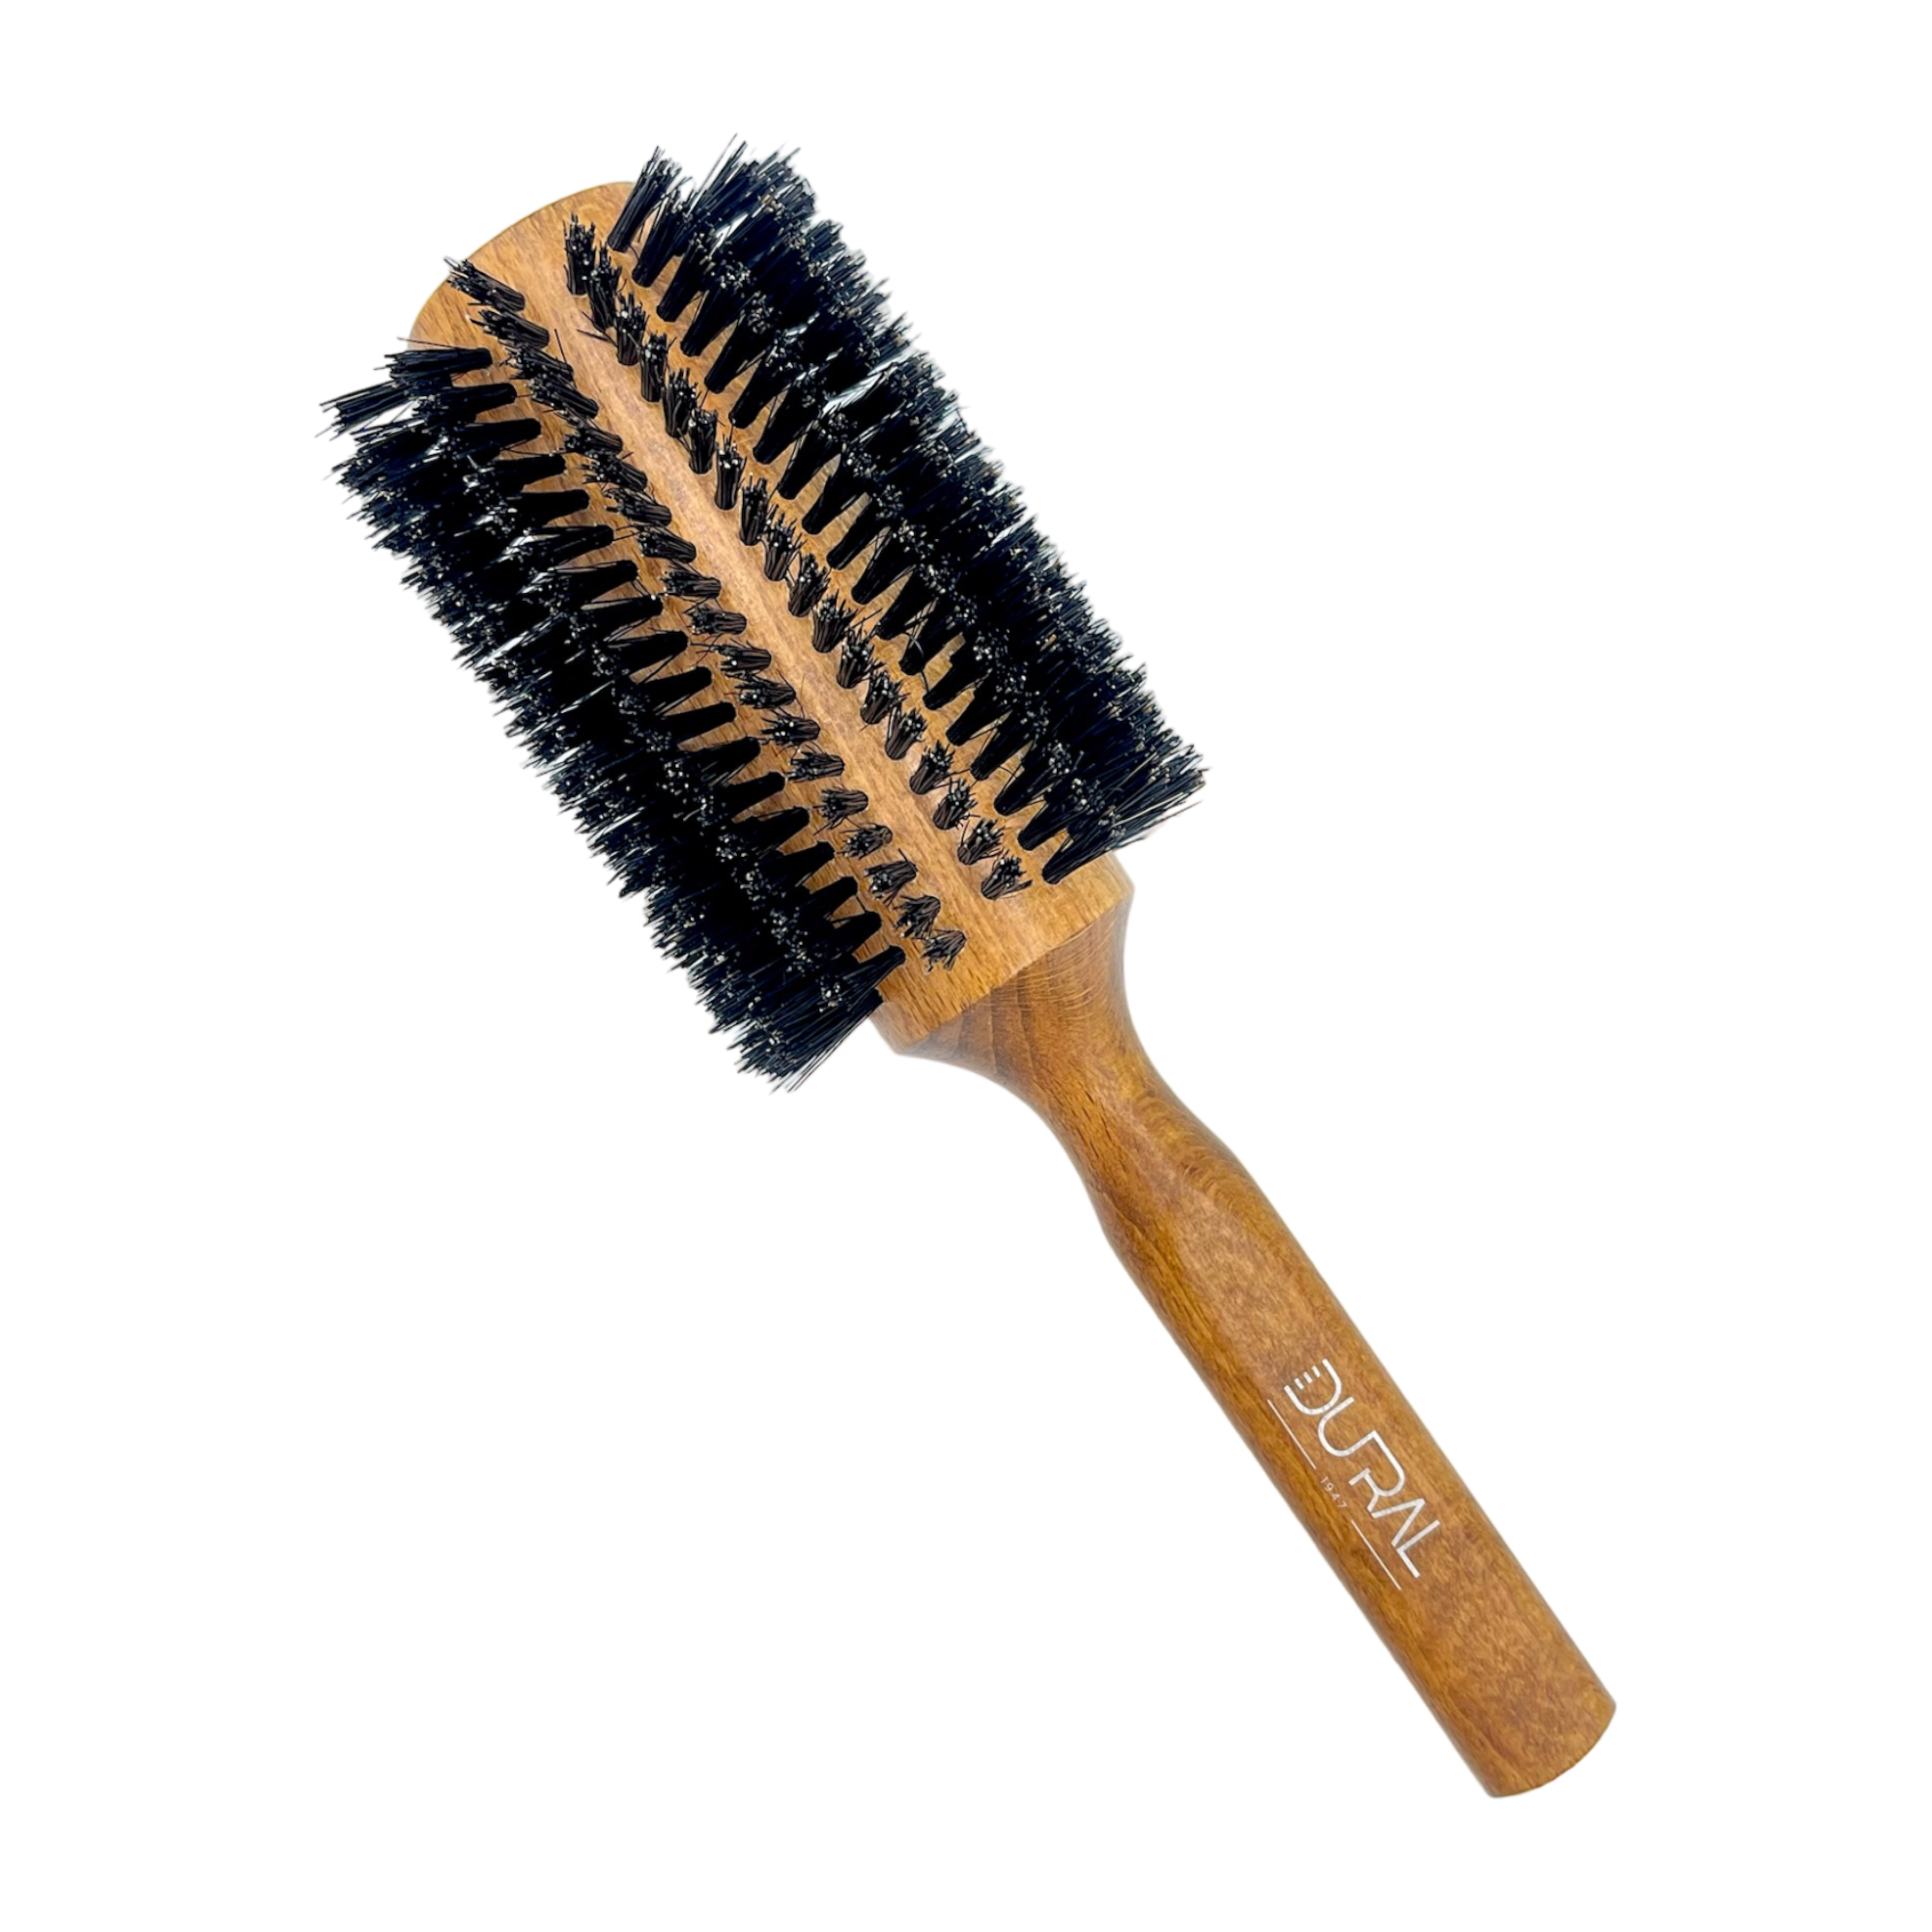 Dural Beech wood round-styler hair brush with boar bristles - 16 rows